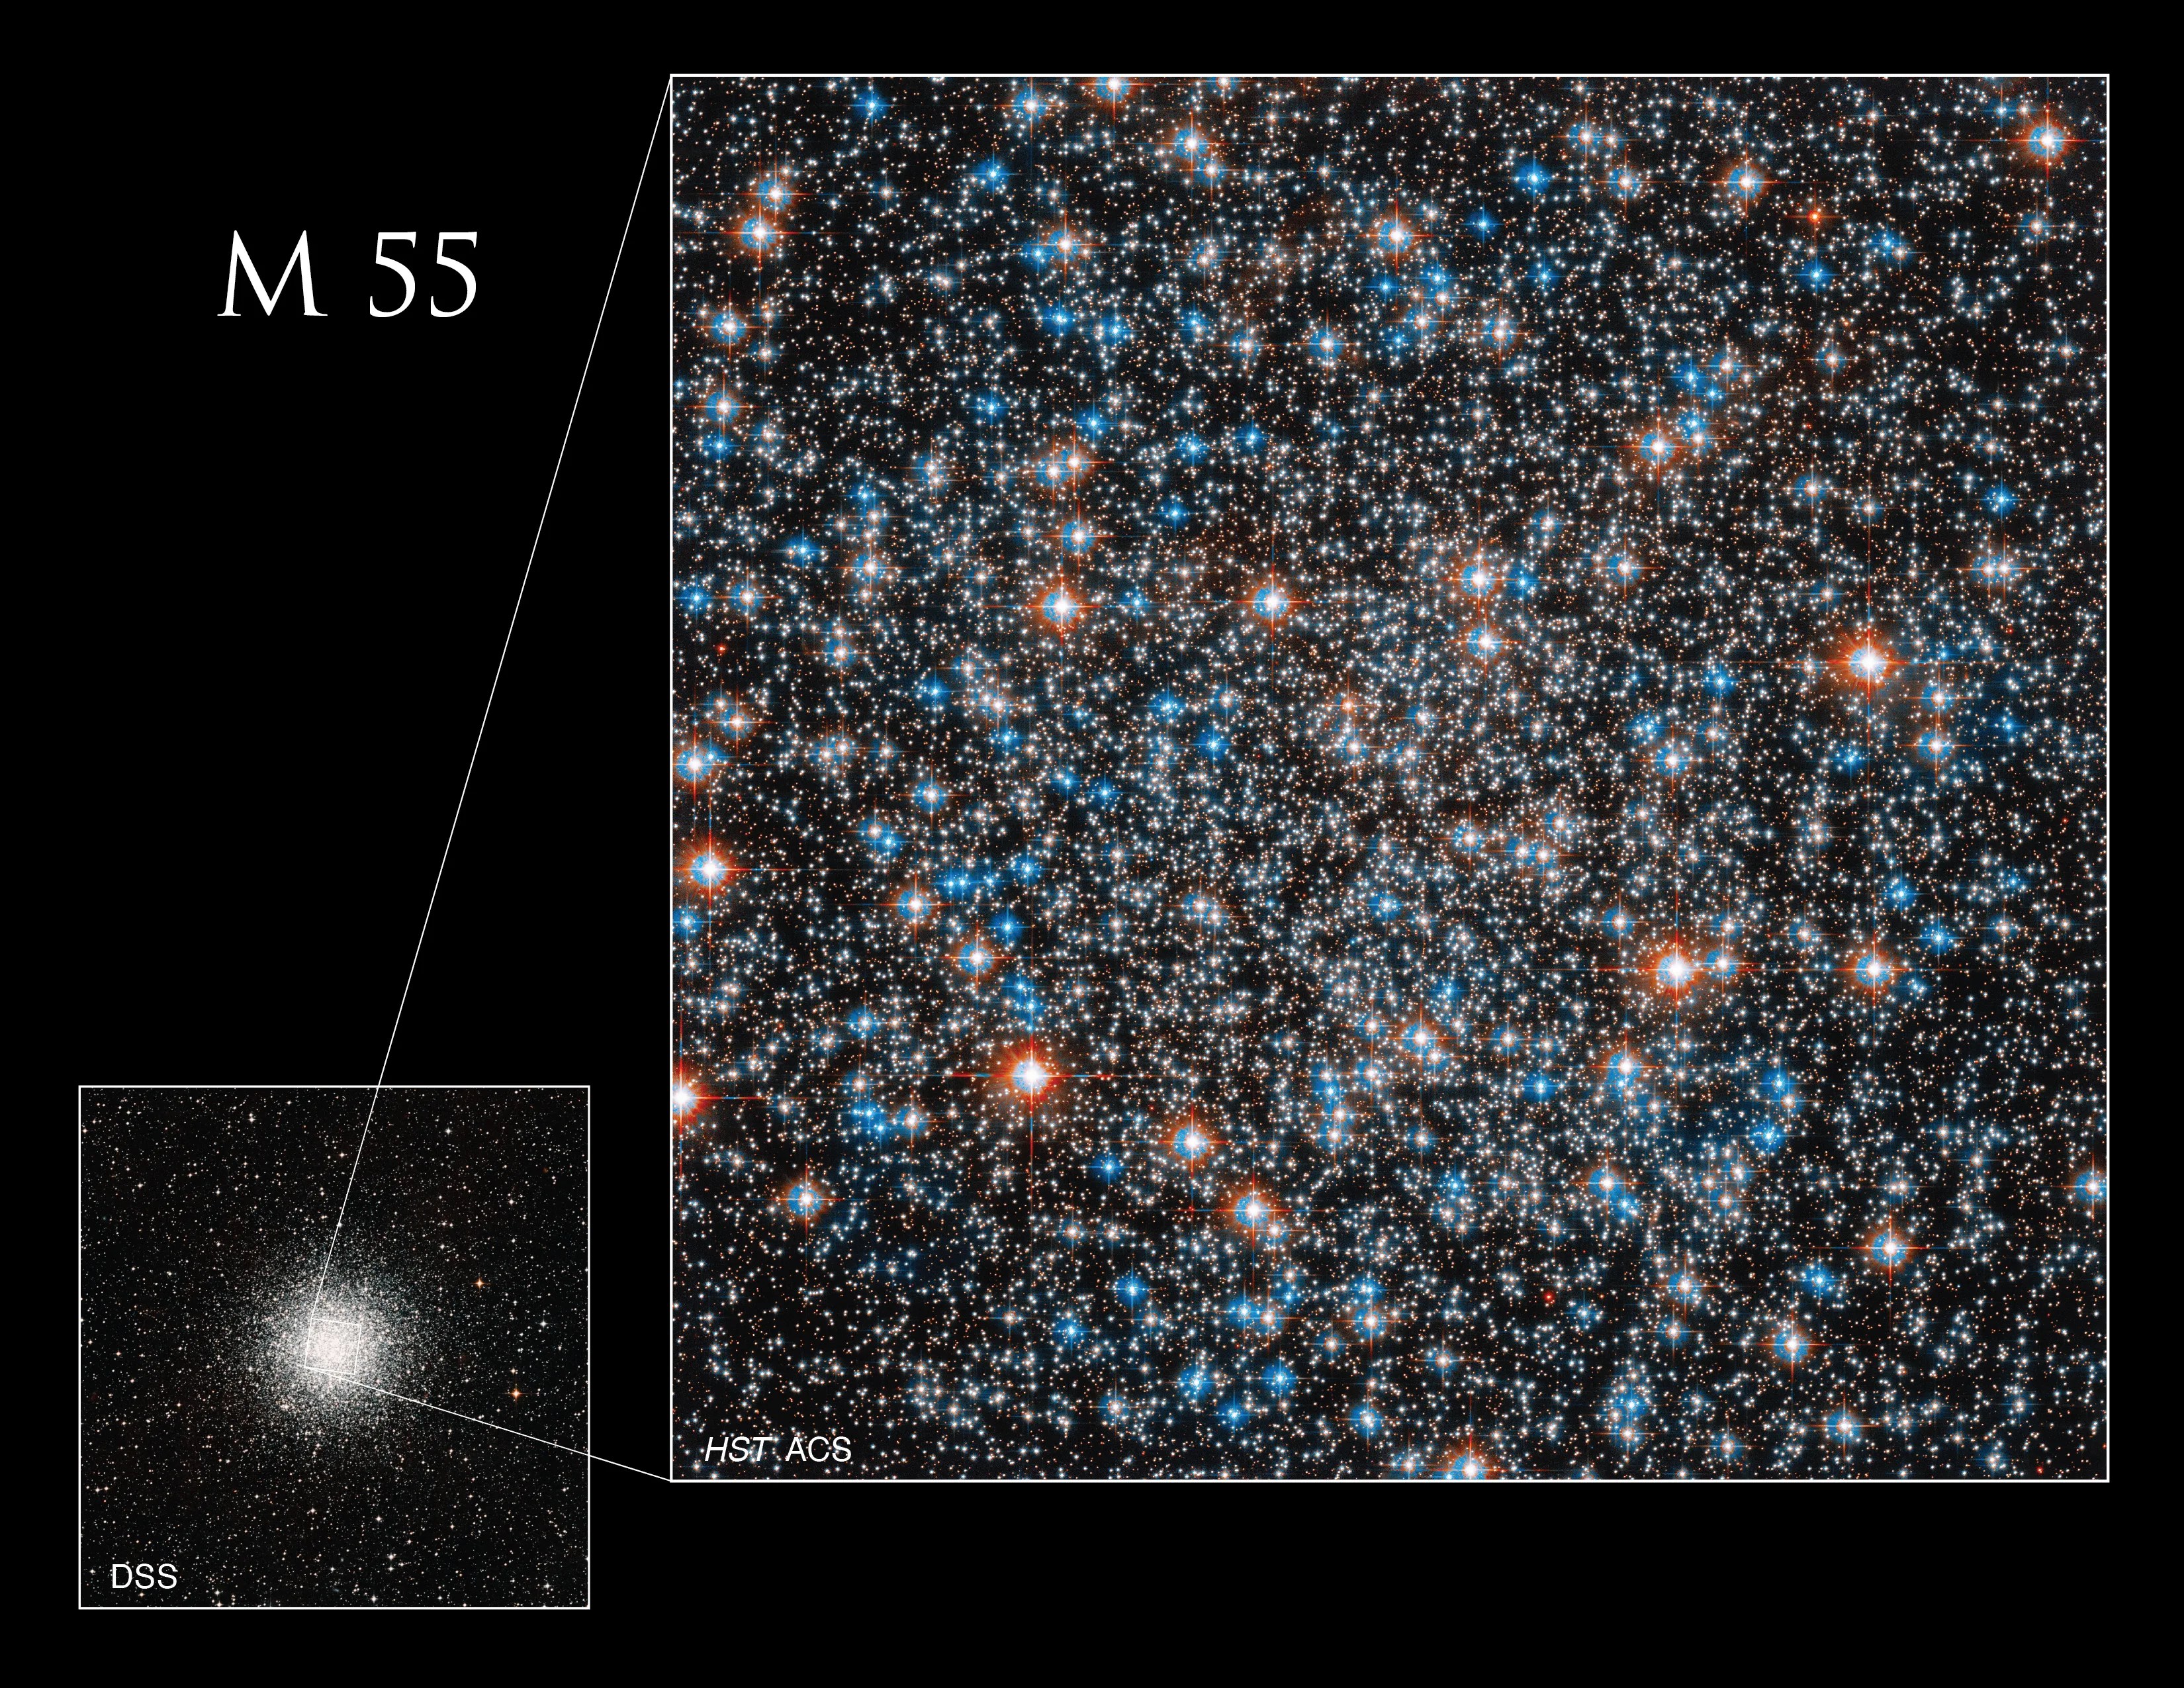 Lower left: A concentrated sphere of white stars against a black background. Right half of image: Hubble image of M55. Field is filled with white stars, smattered with blue-white and reddish-orange stars.